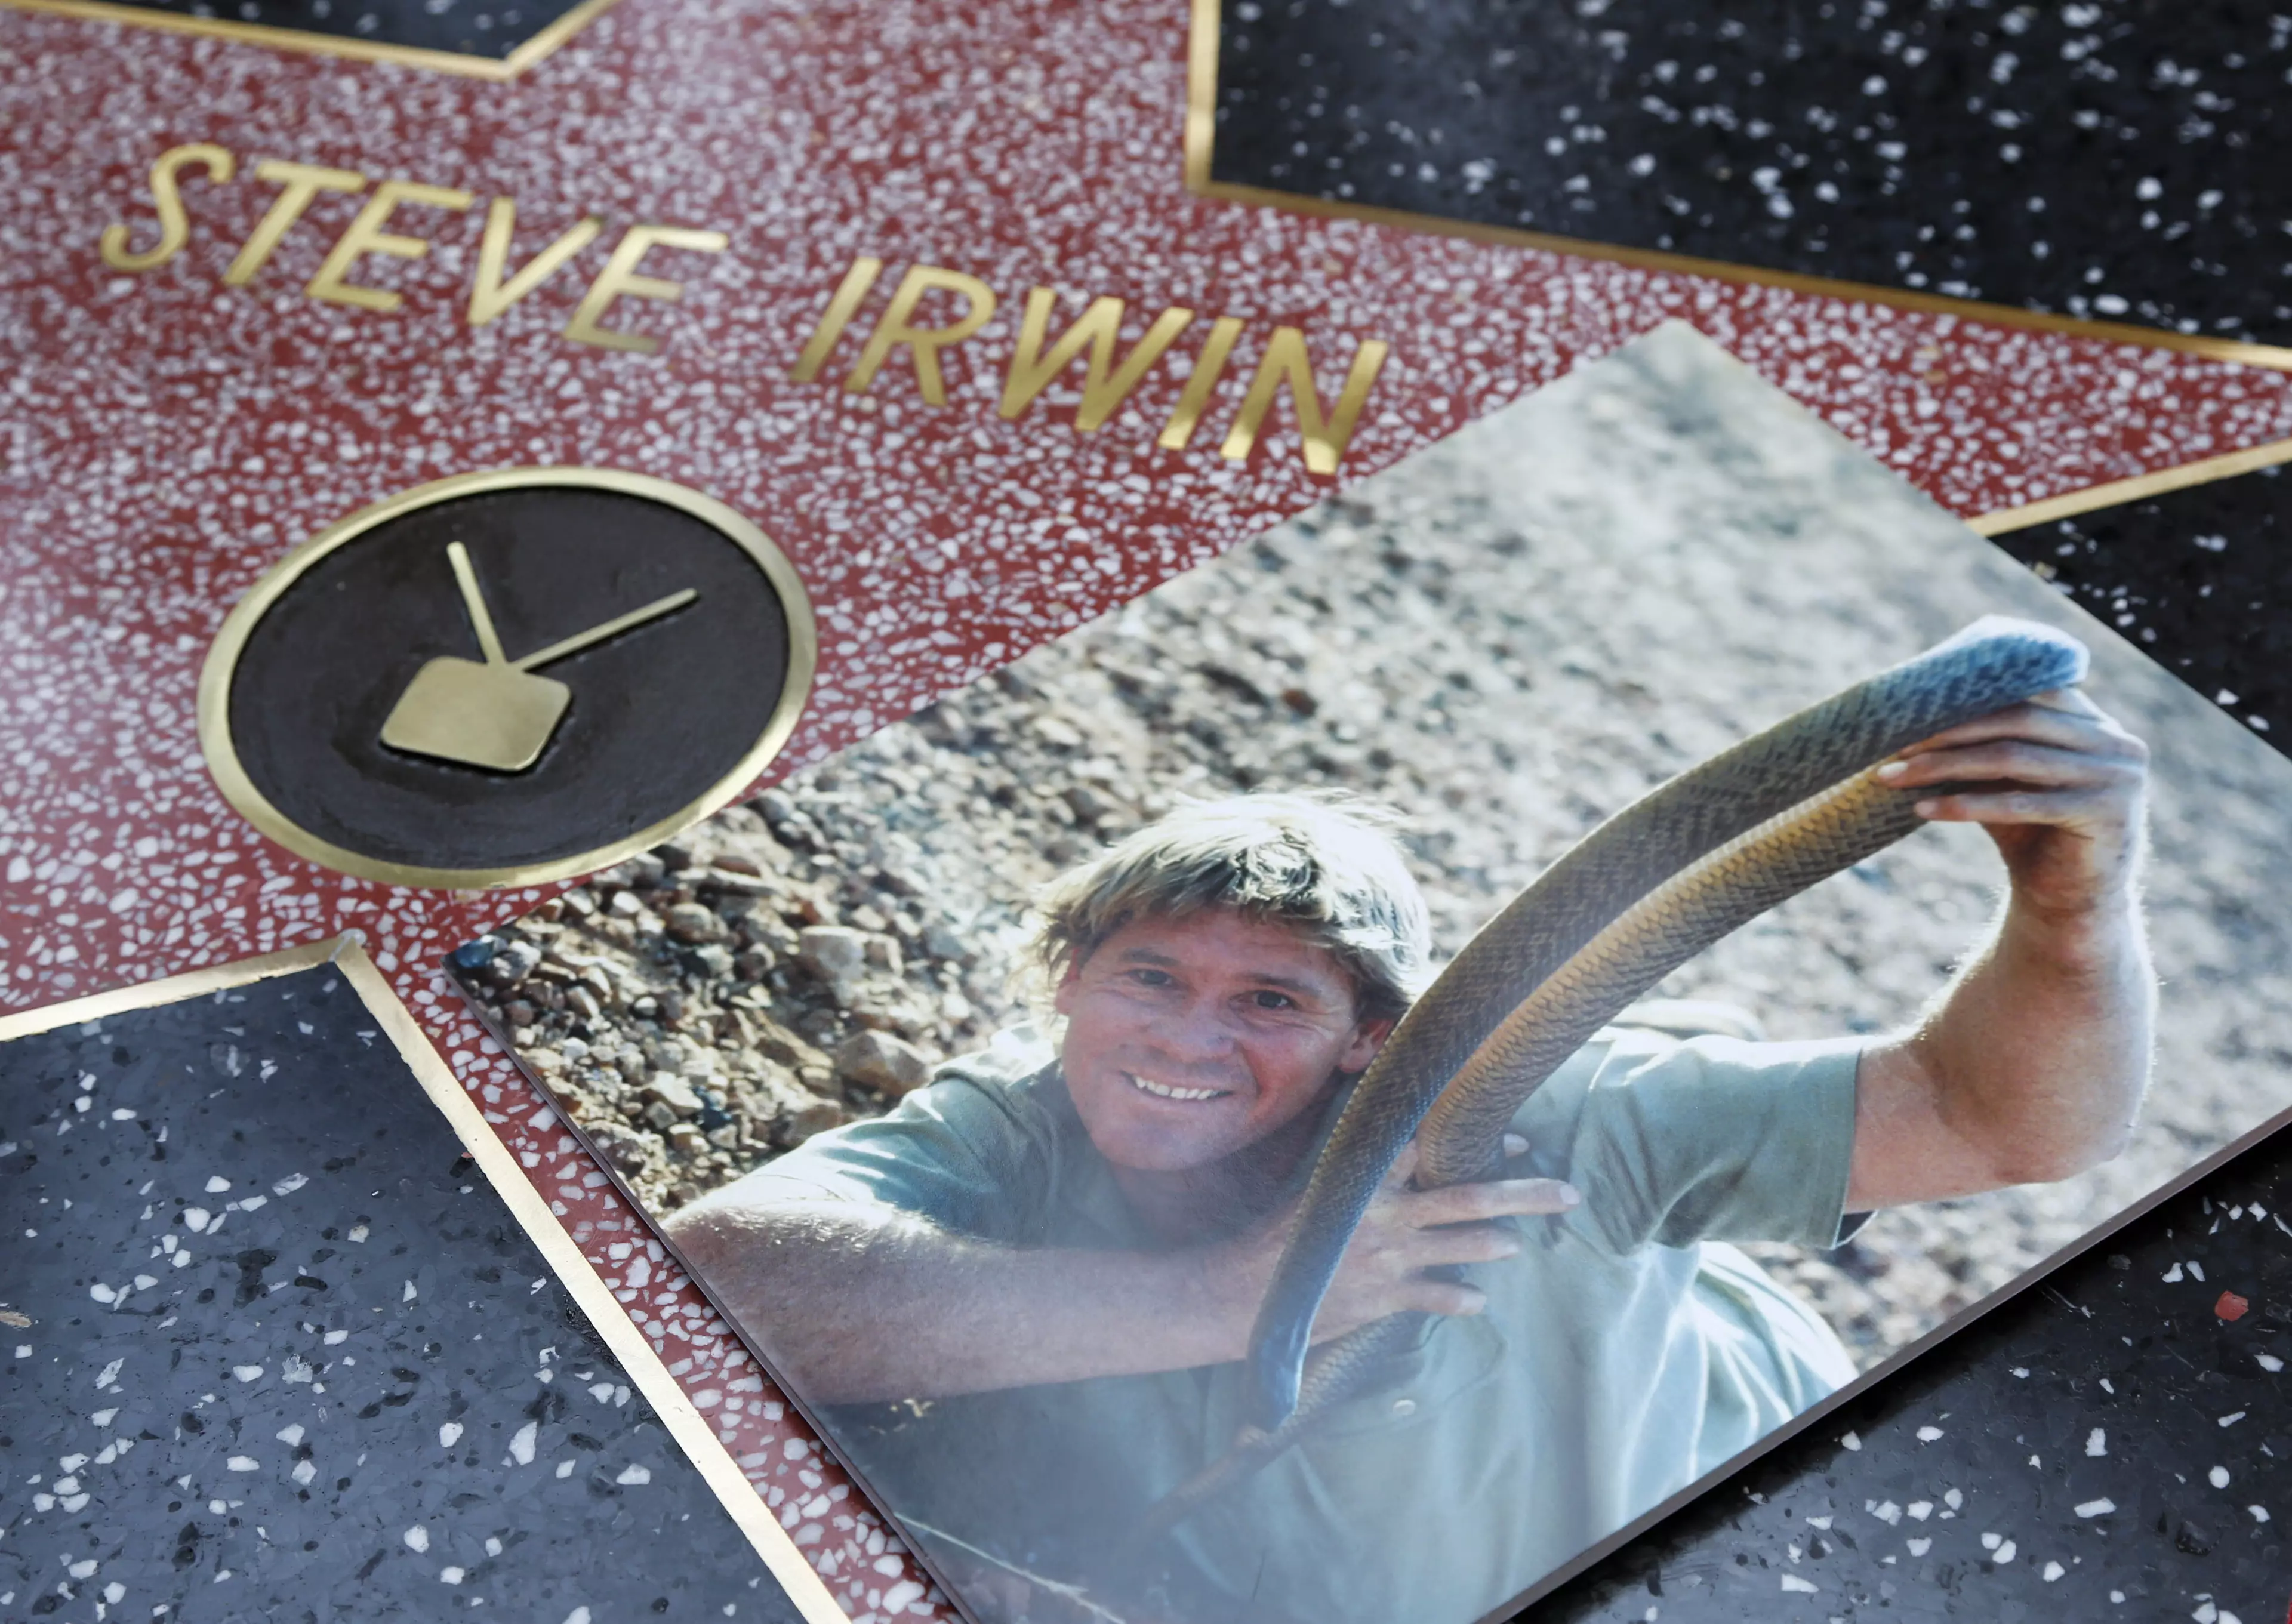 Irwin was honoured with a star on the Hollywood Walk of Fame.